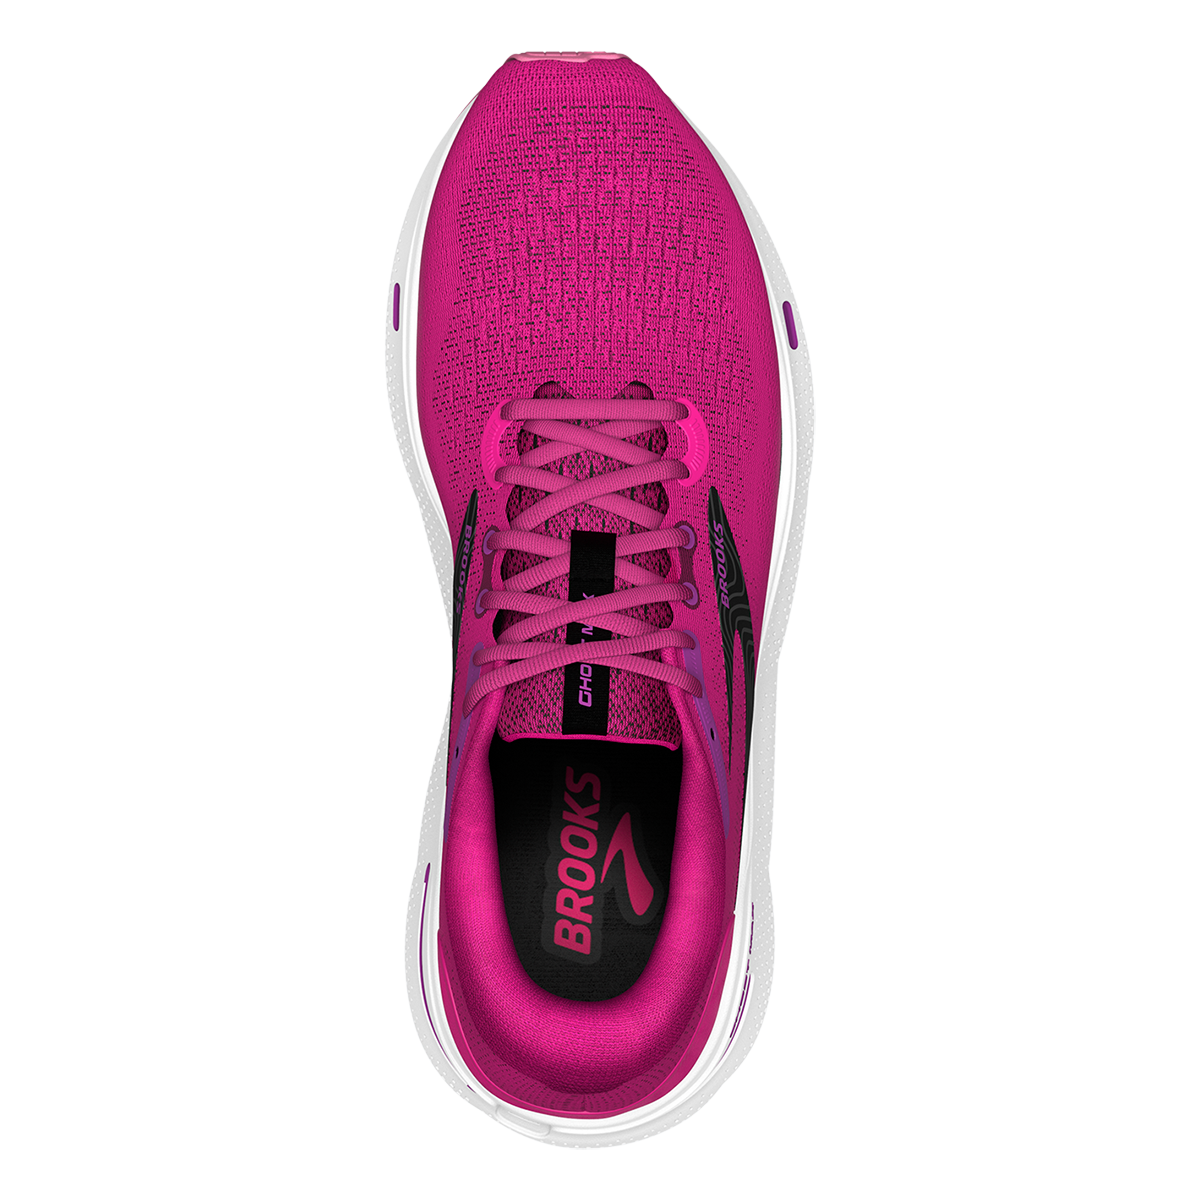 Brooks Ghost Max, , large image number null